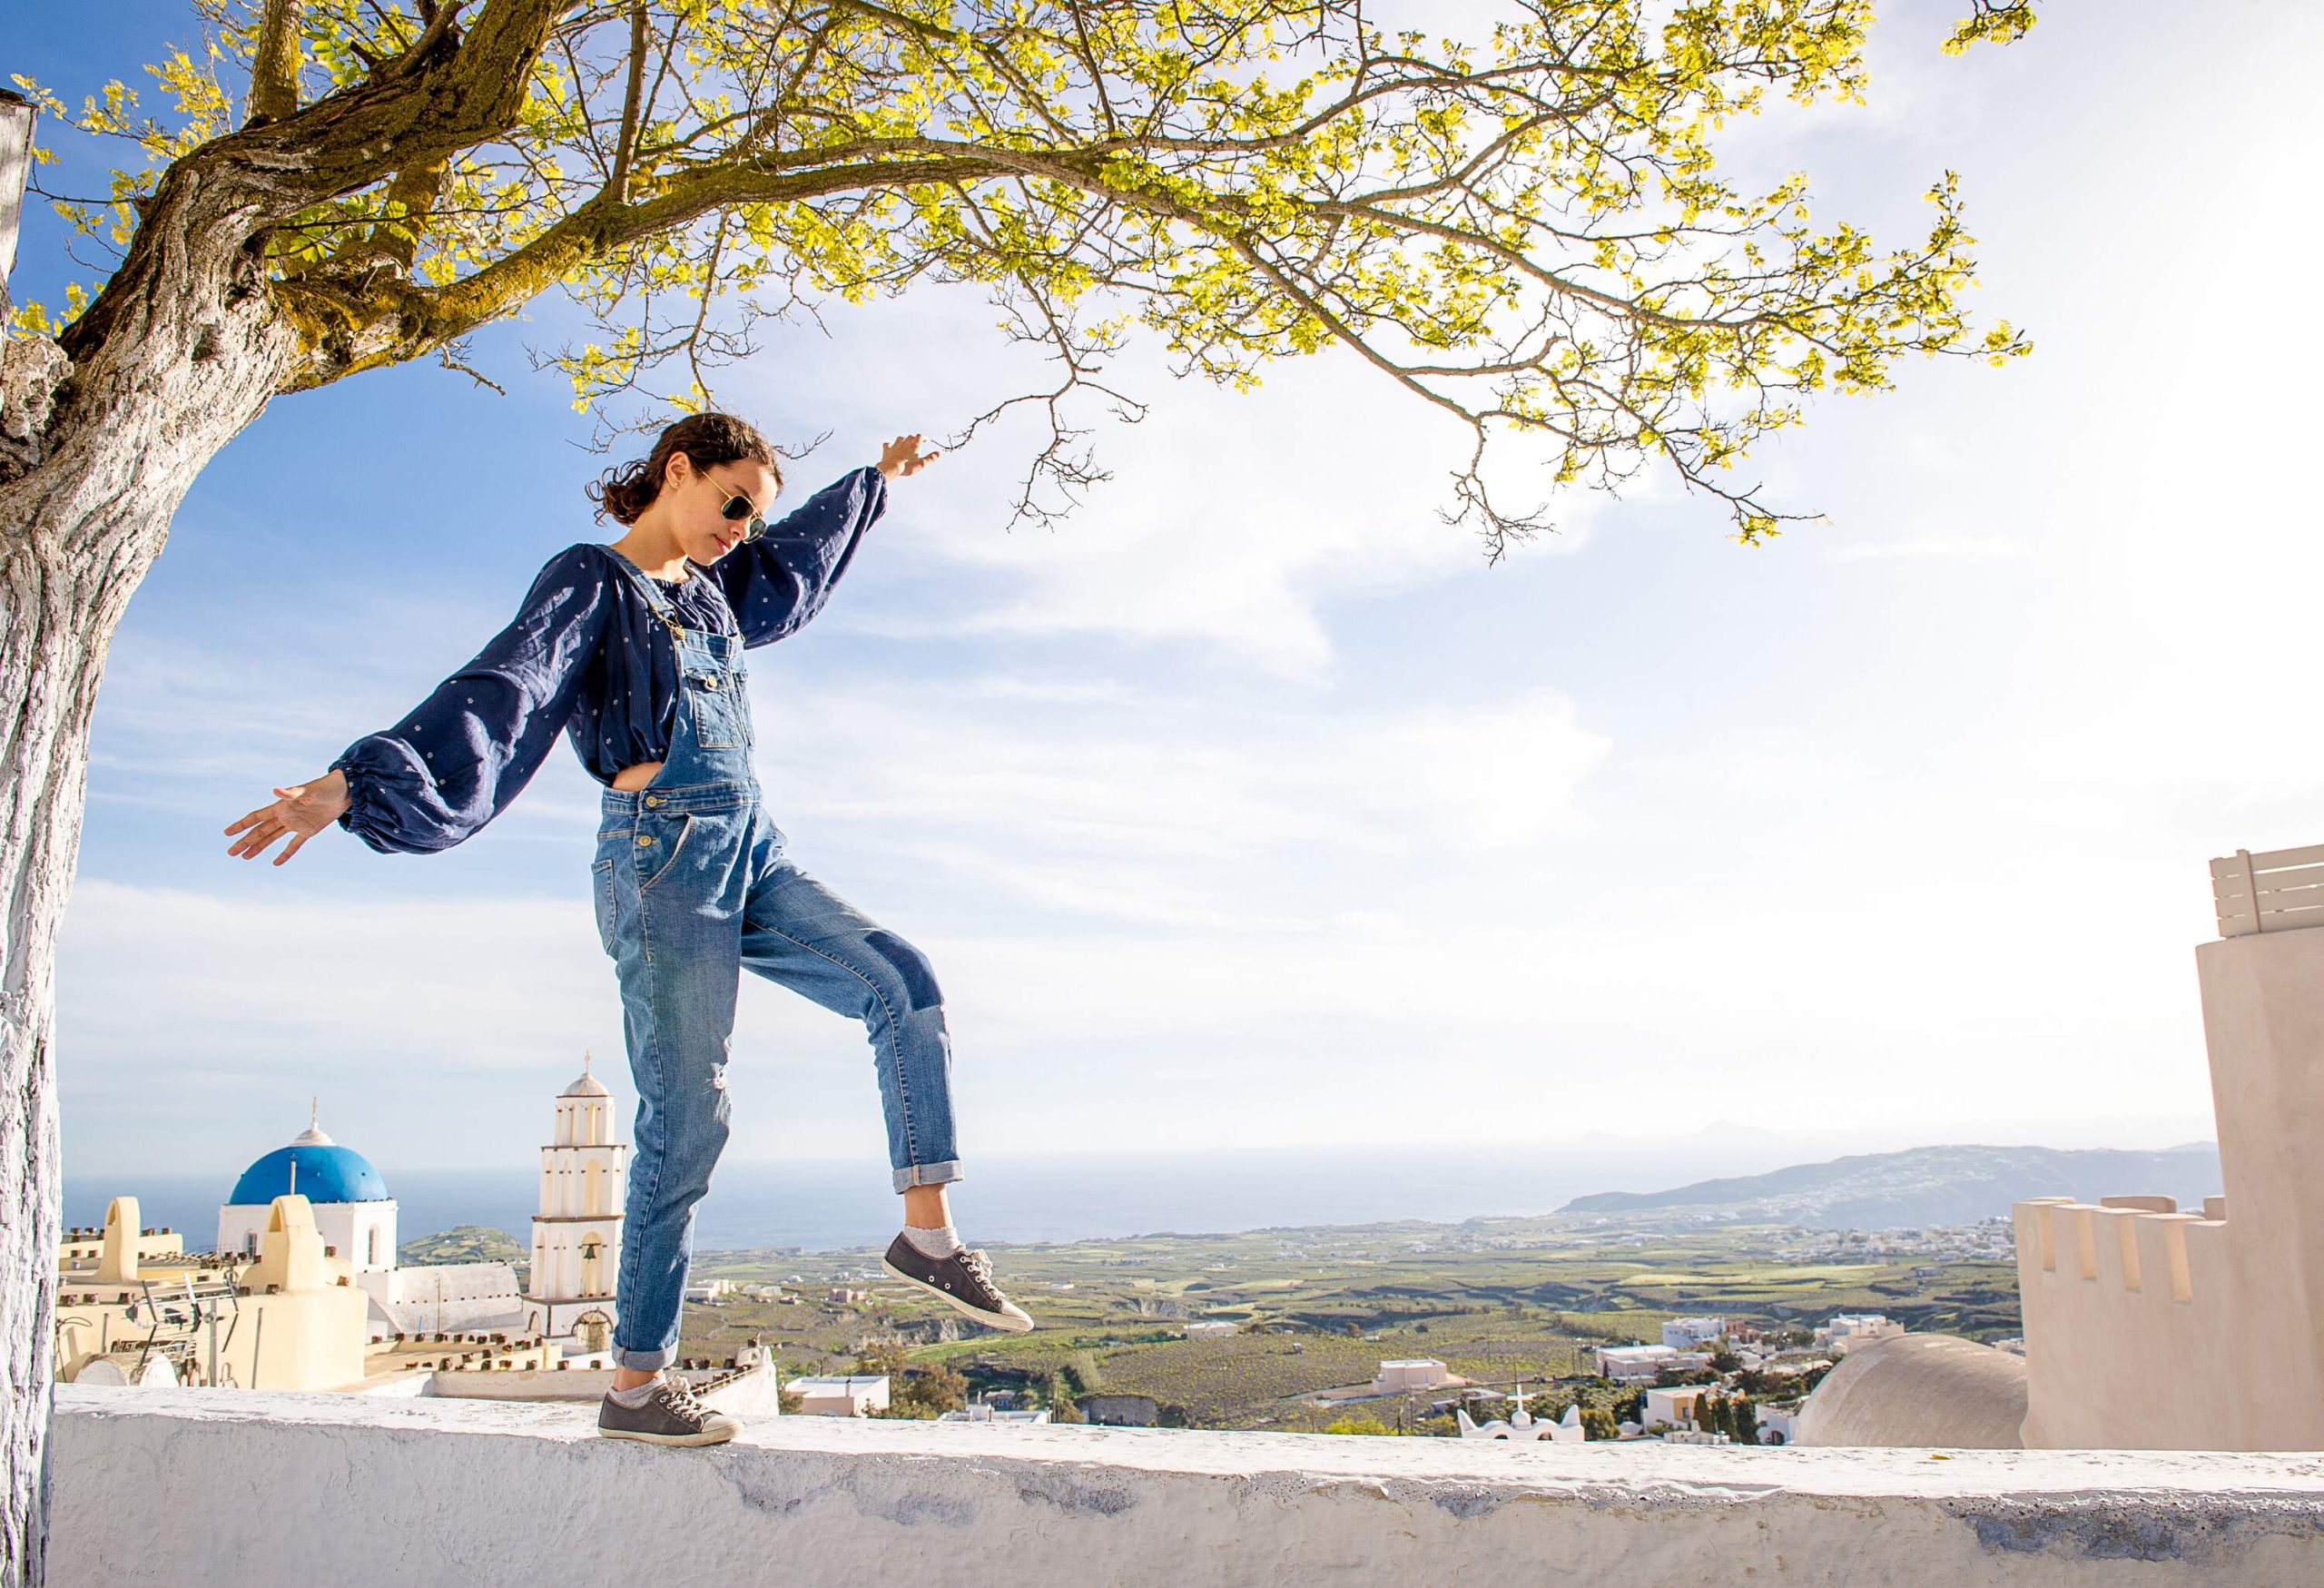 A person donning sunglasses stands on the edge, skillfully balancing while overlooking the expansive landscape and taking in the breathtaking views that stretch before them.